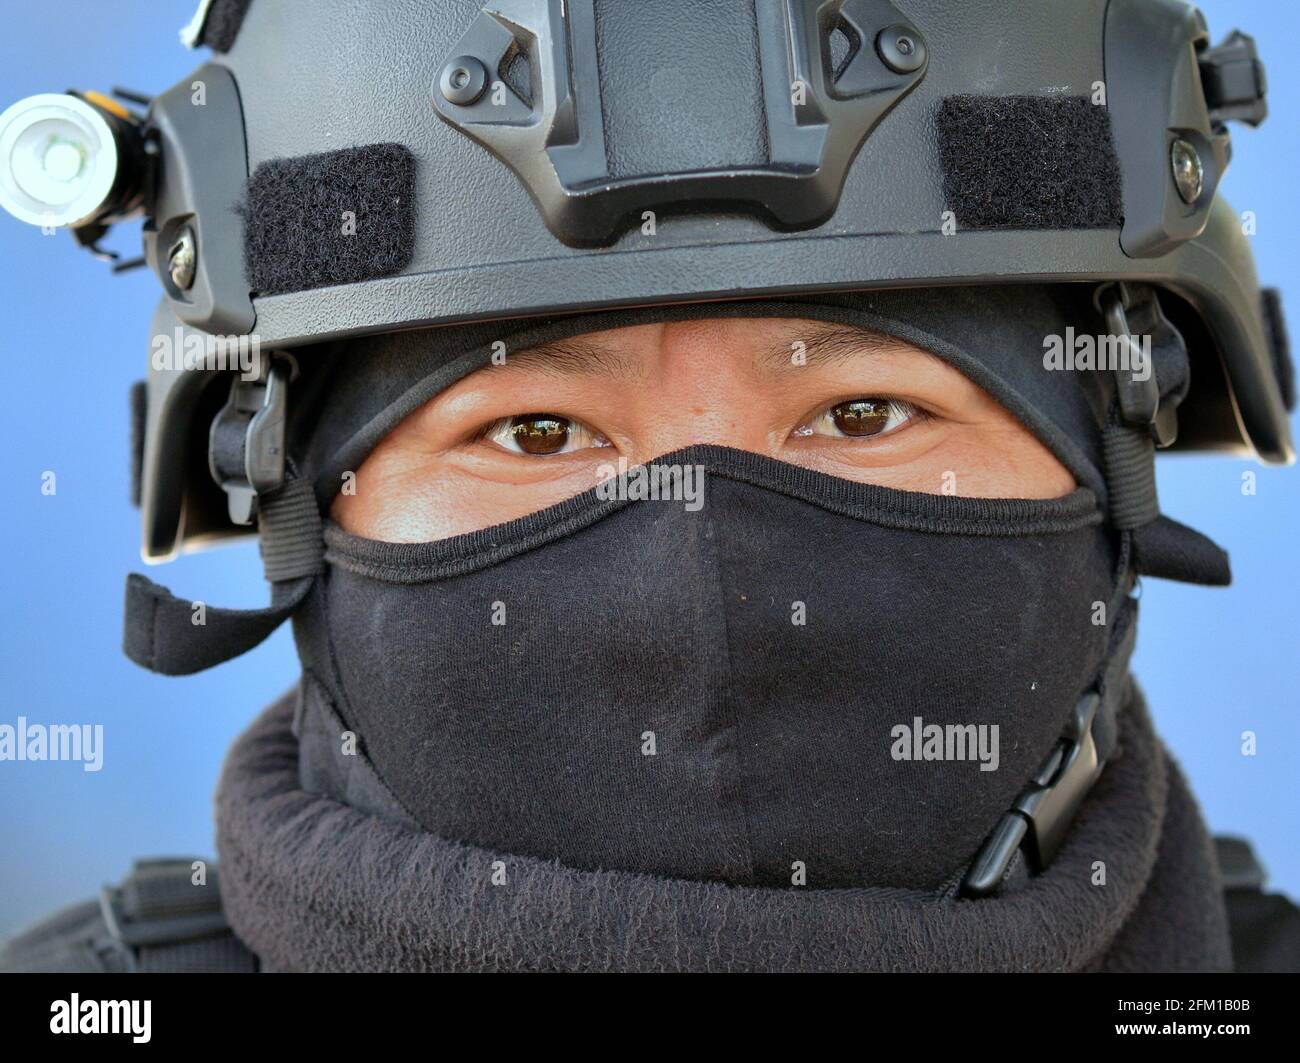 Young tough tactical motorcycle police officer wears personal protective equipment and a black balaclava and looks with weary eyes at the viewer. Stock Photo